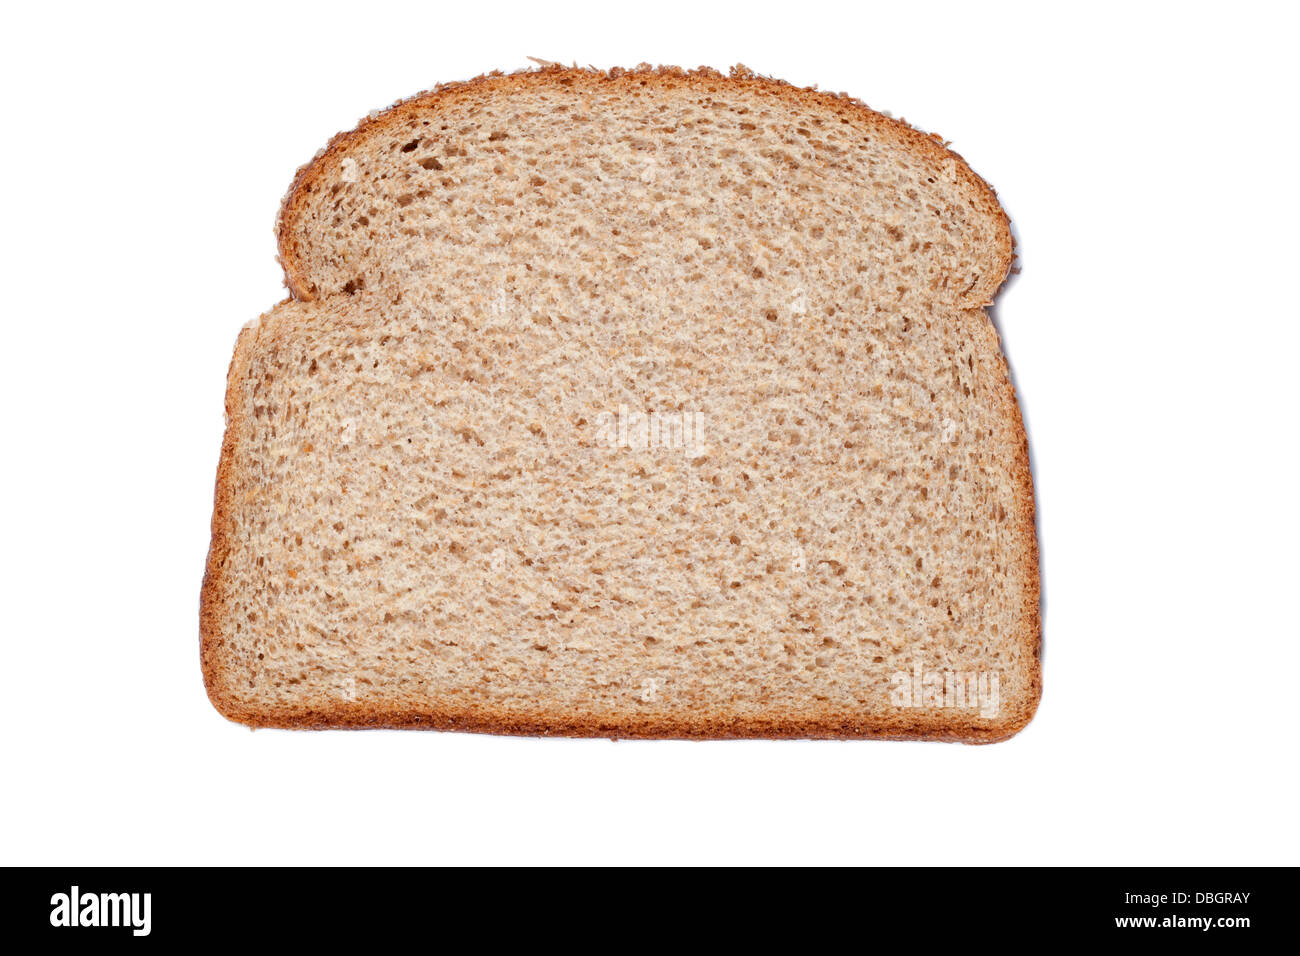 sliced of whole wheat bread Stock Photo